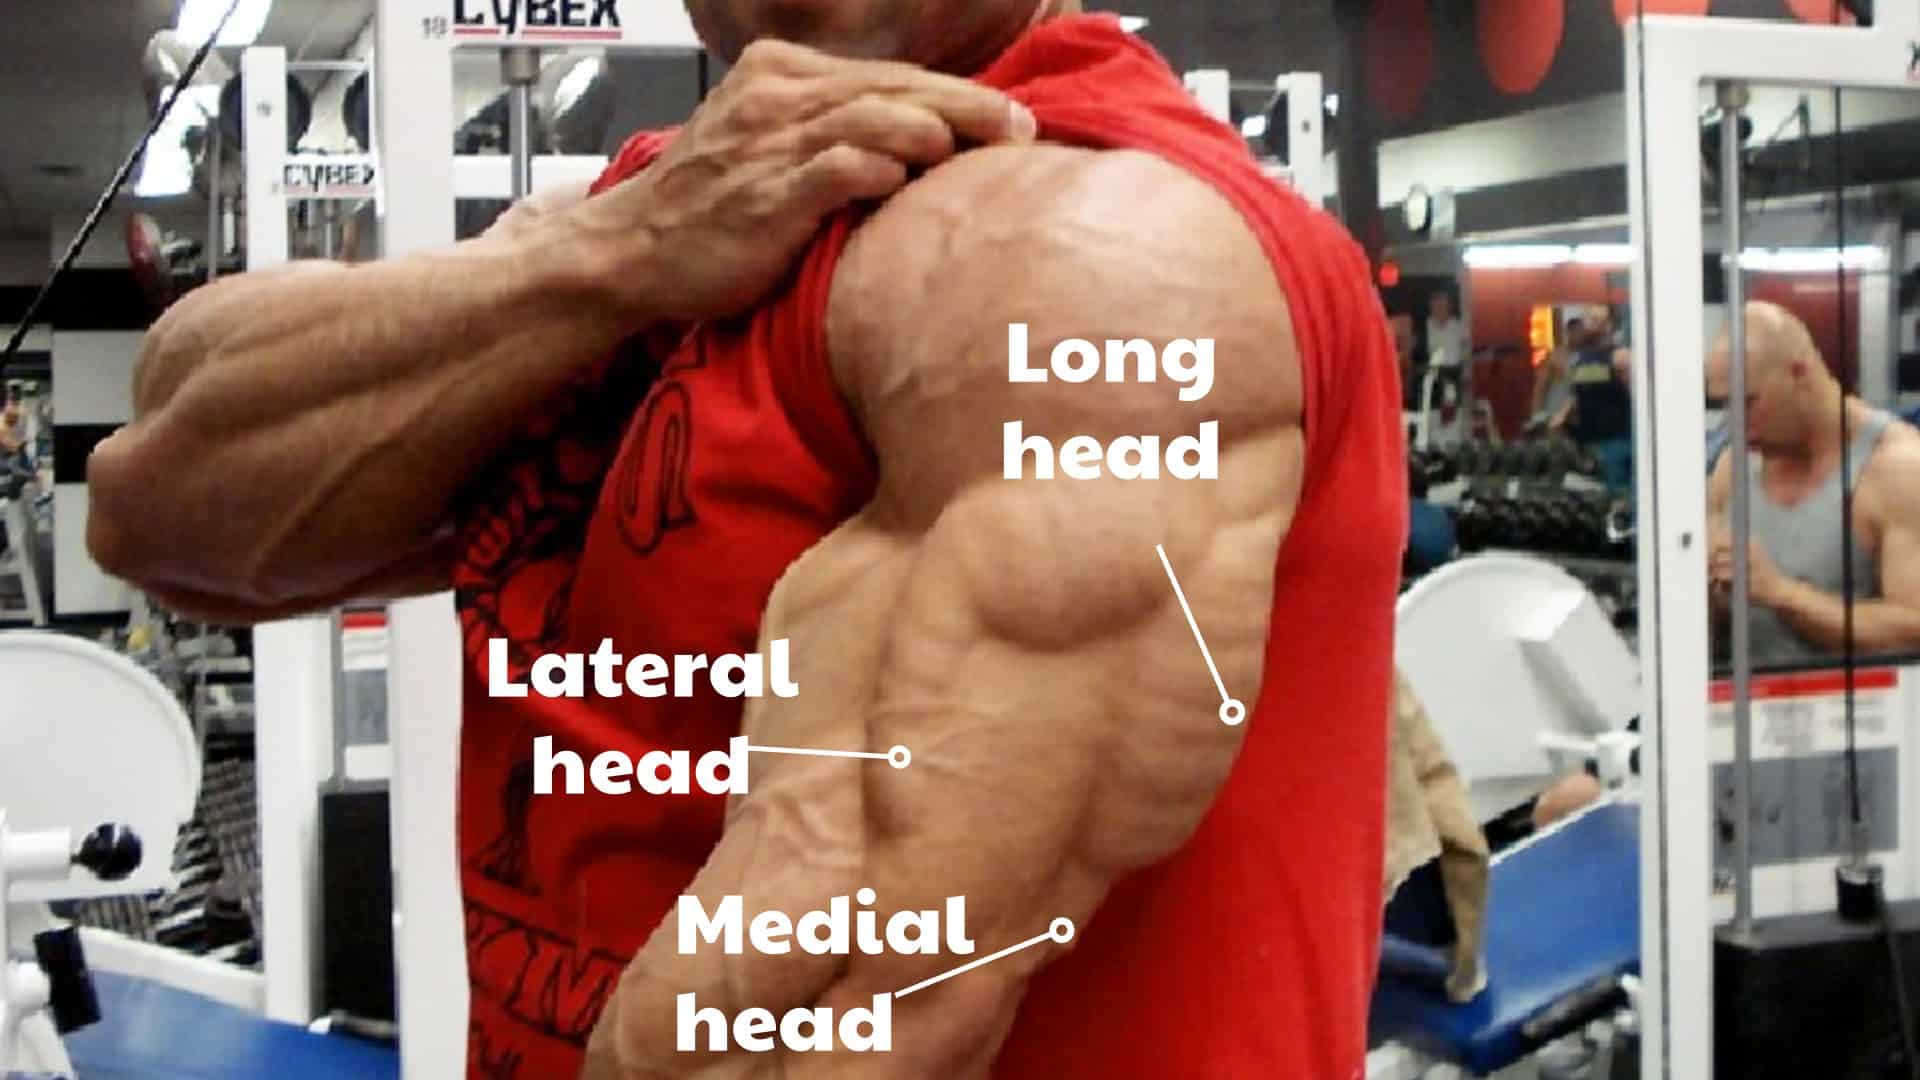 Lateral head triceps exercises for Bigger, Stronger Arms